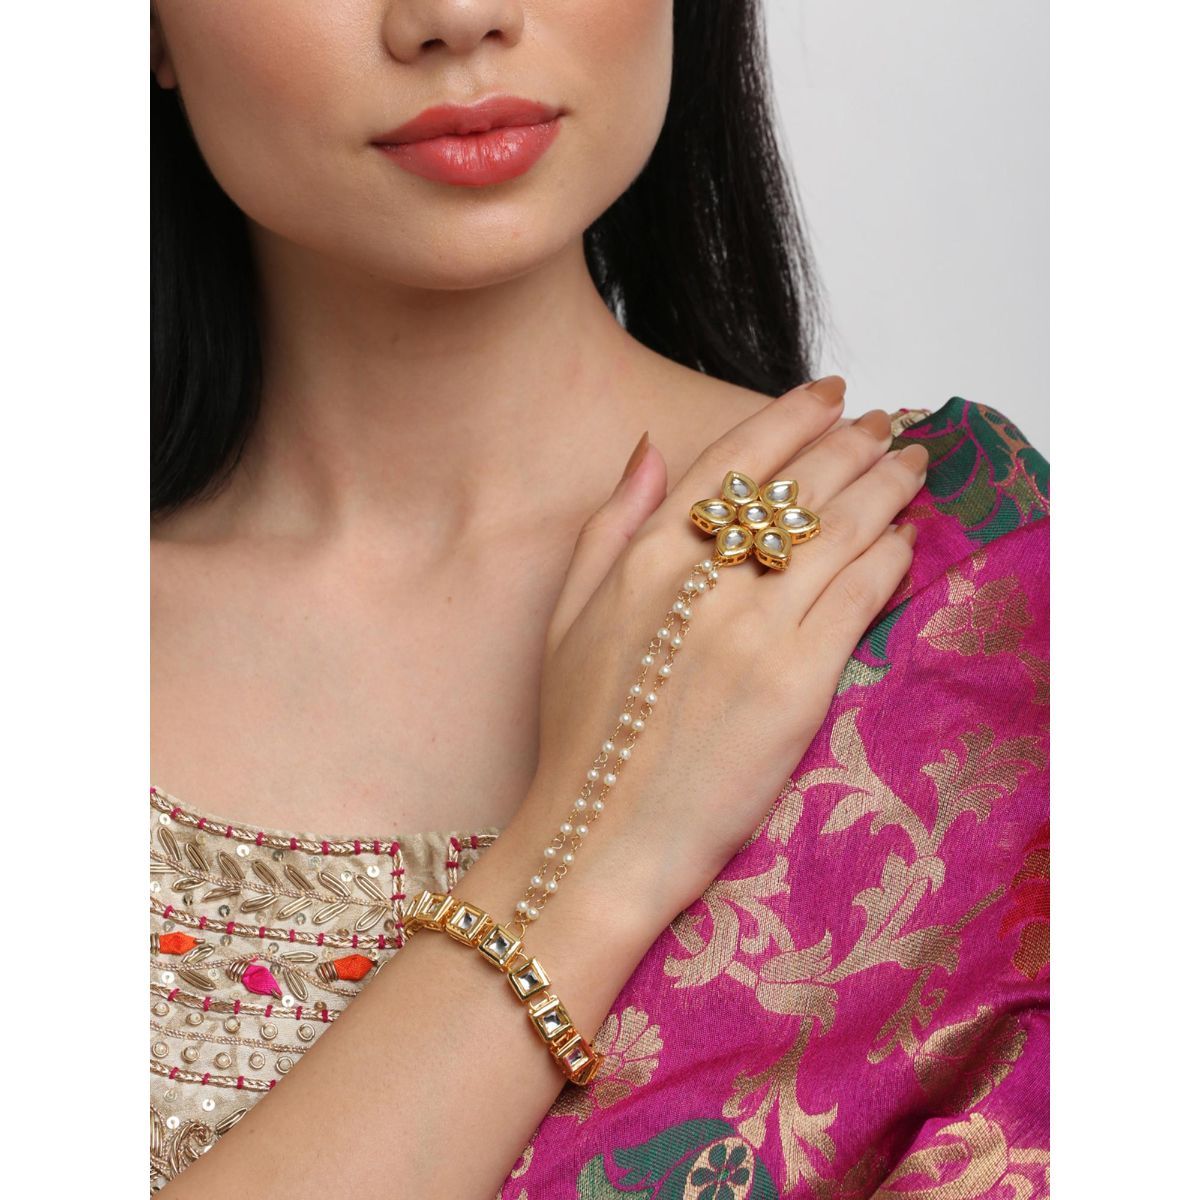 Priyaasi GoldPlated Handcrafted Ring Bracelet Buy Priyaasi GoldPlated  Handcrafted Ring Bracelet Online at Best Price in India  Nykaa